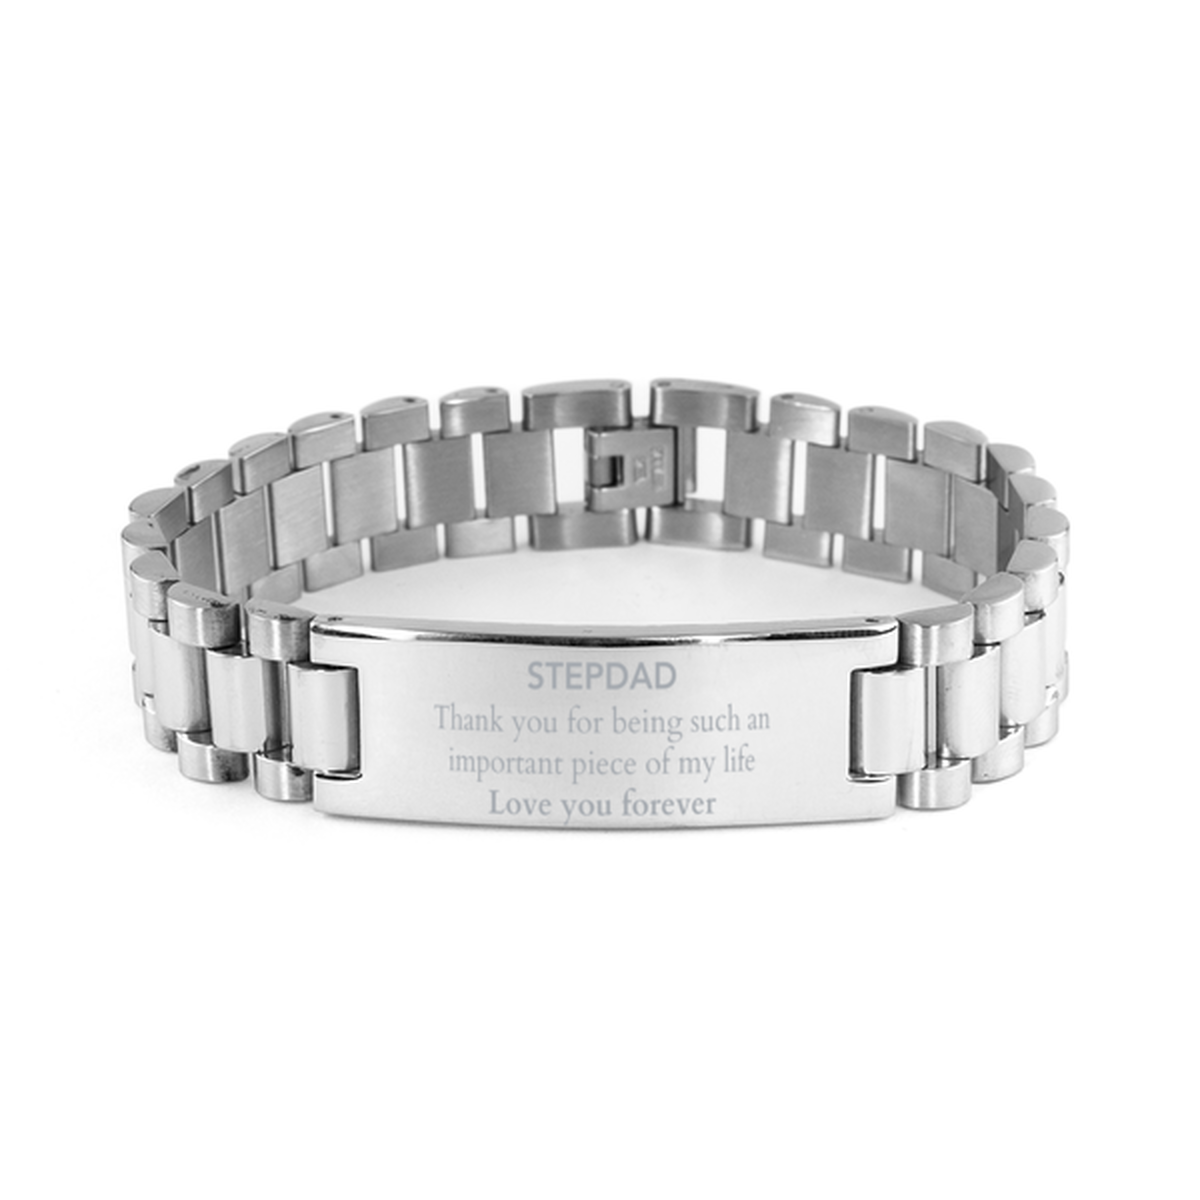 Appropriate Stepdad Ladder Stainless Steel Bracelet Epic Birthday Gifts for Stepdad Thank you for being such an important piece of my life Stepdad Christmas Mothers Fathers Day